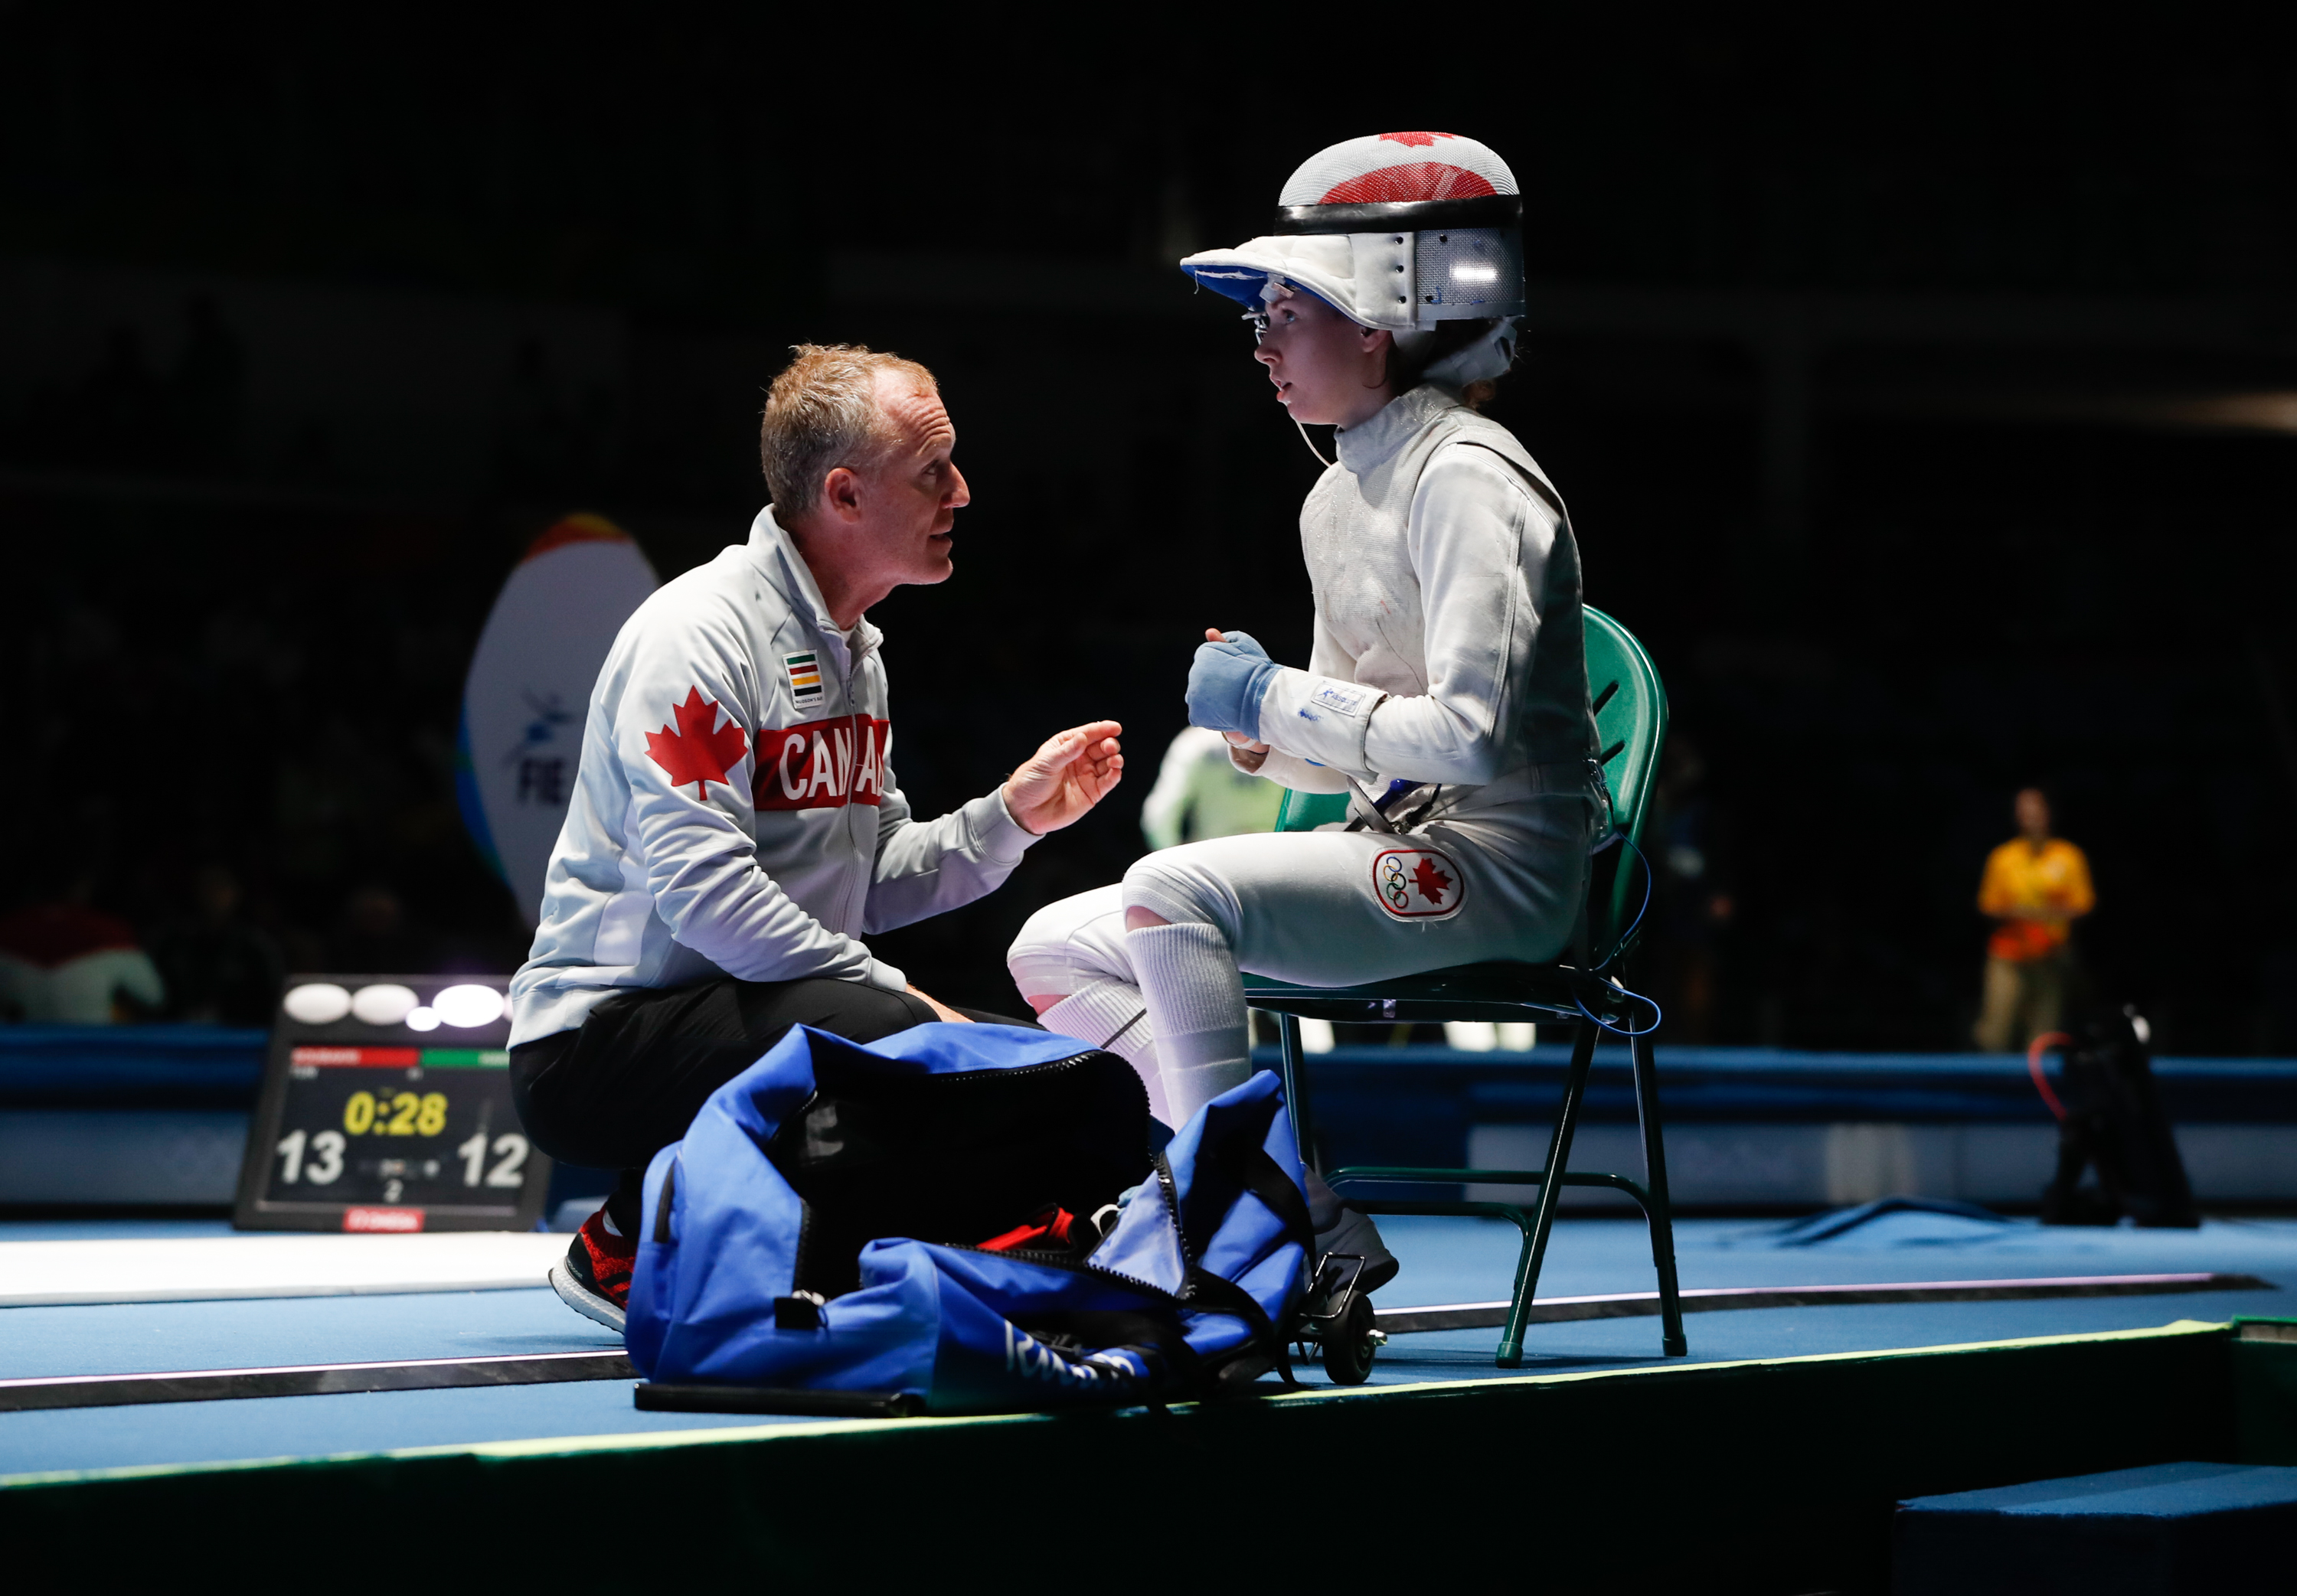 Eleanor Harvey sits between periods of her quarterfinal bout of the women's individual foil at Rio 2016 (Photo: COC/Mark Blinch, August 10, 2016)